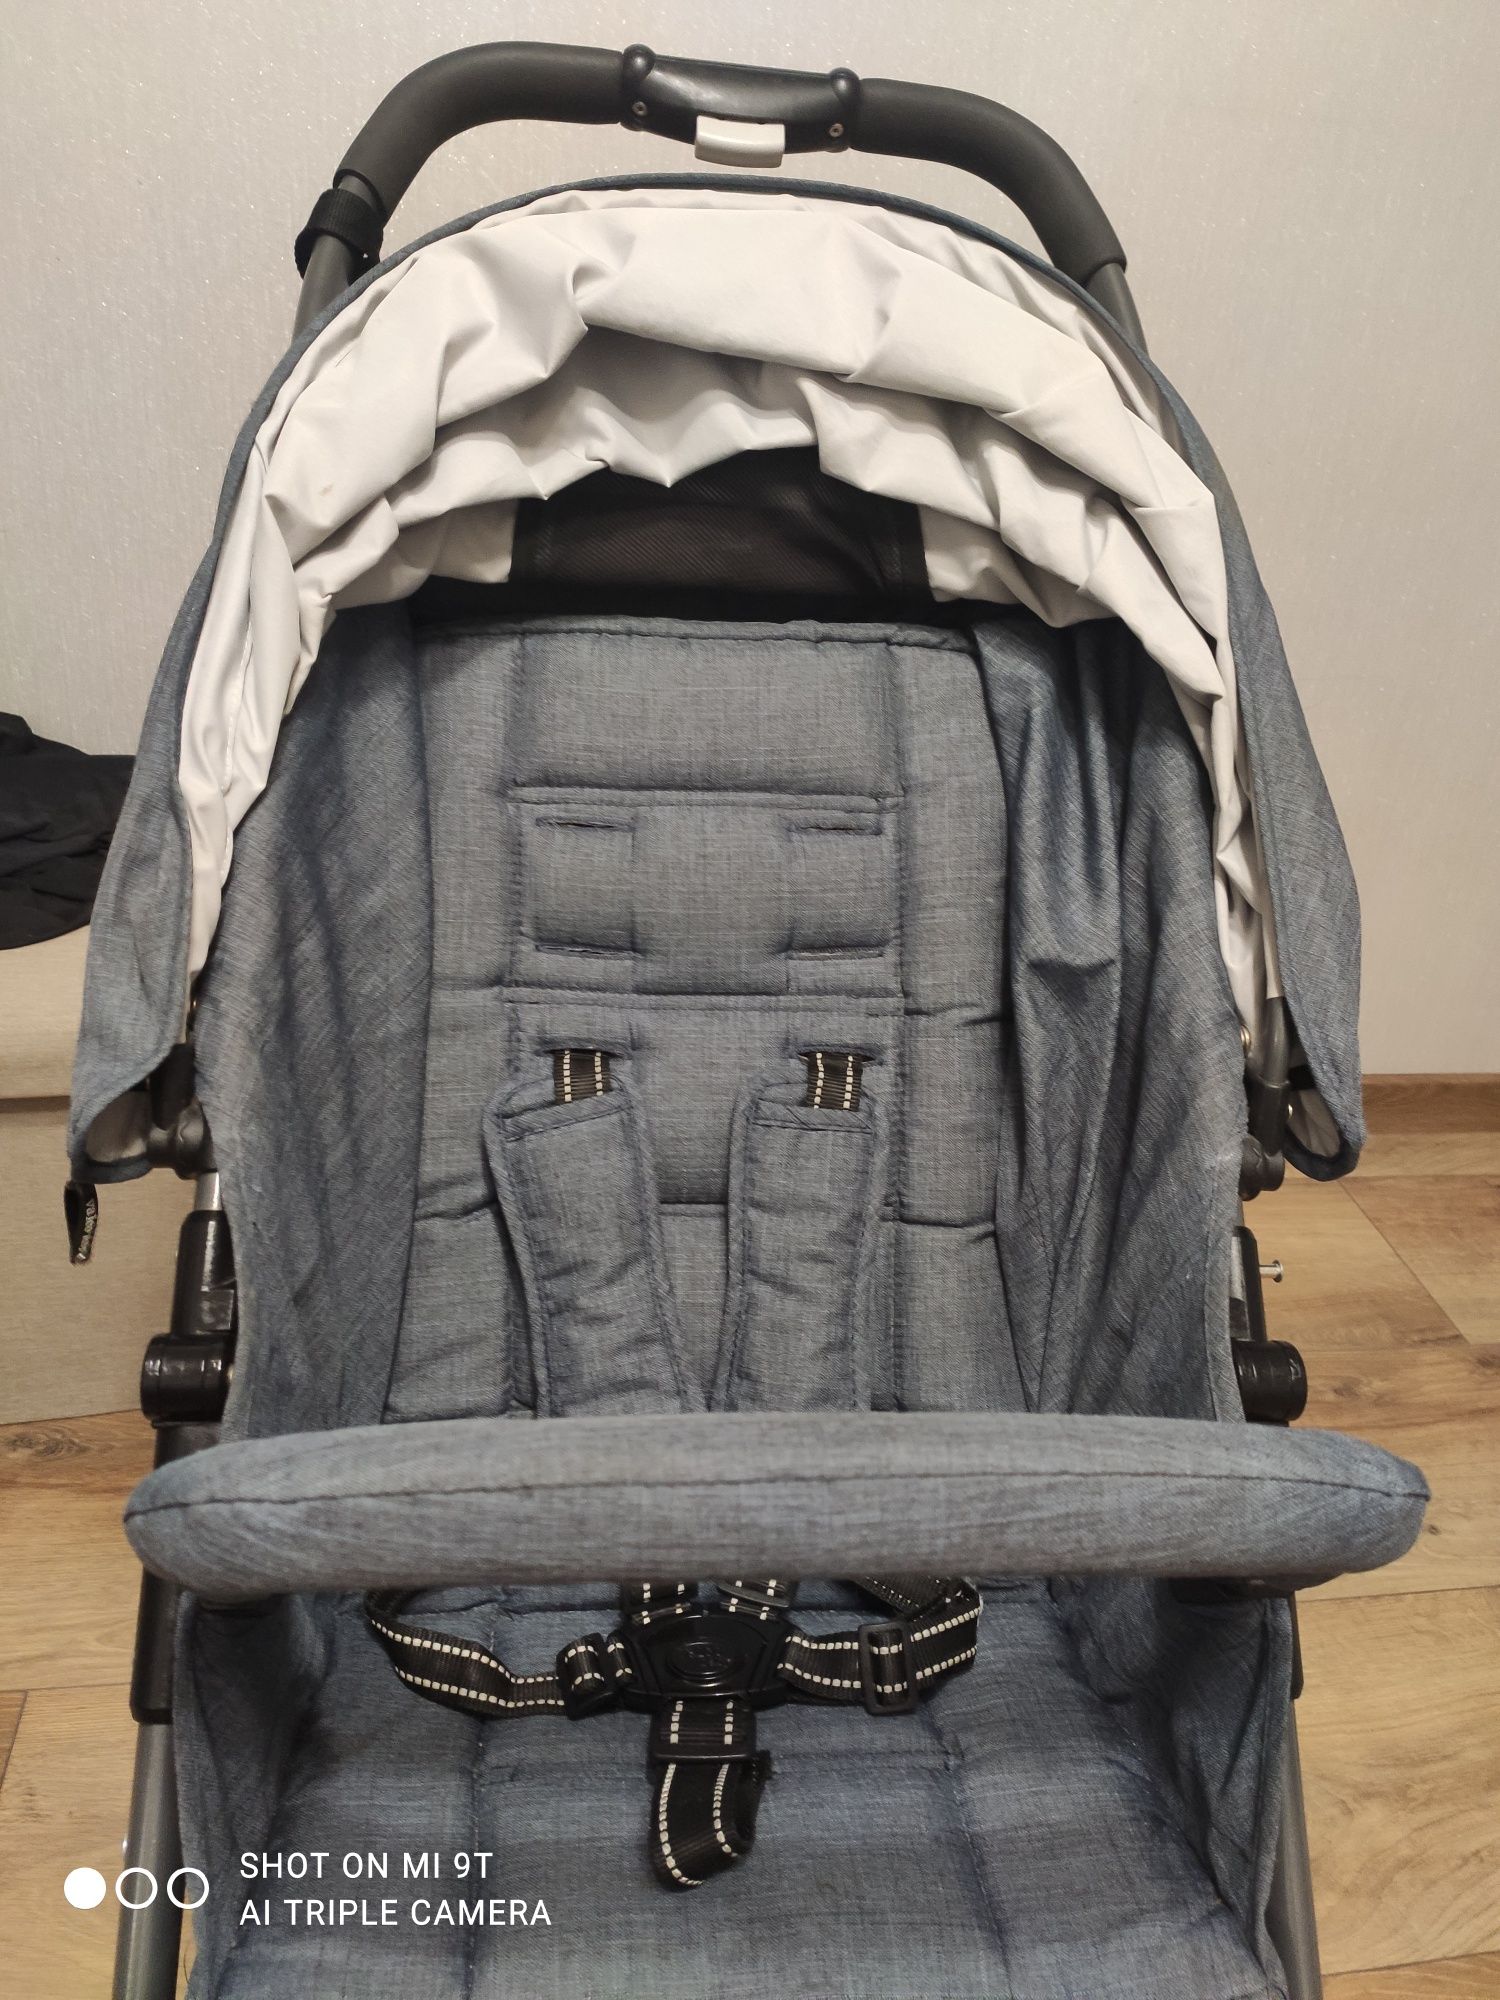 Wózek spacerowy Valco Baby Snap 4 Denimm, Tailor made.